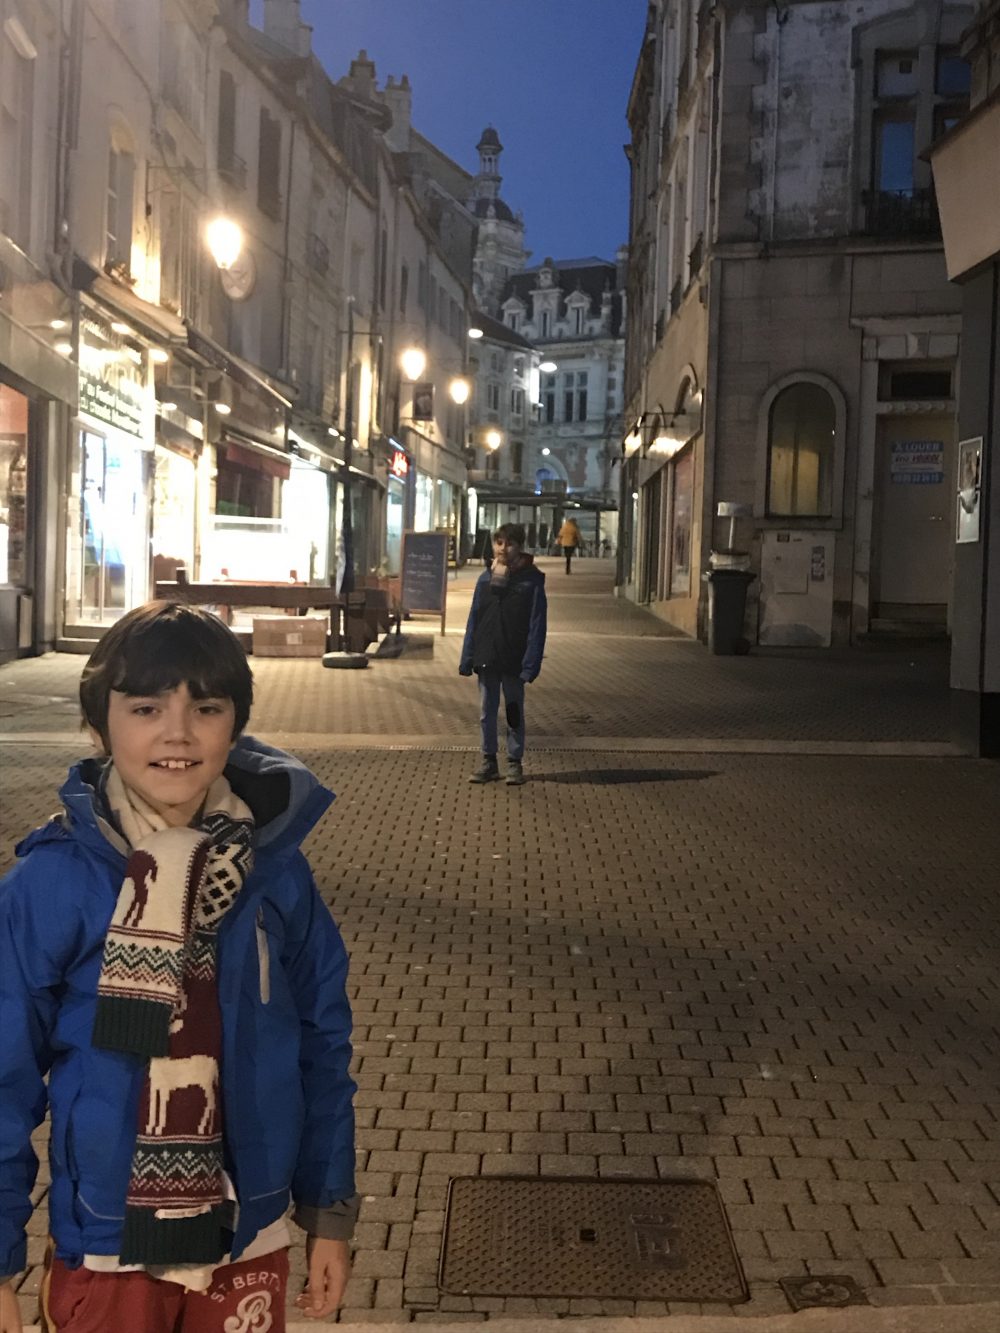 Walking the streets of Chaumont, our pit-stop for the night. Photo: The-Ski-Guru. The Half Term Family Ski Holiday that did not result as planned.